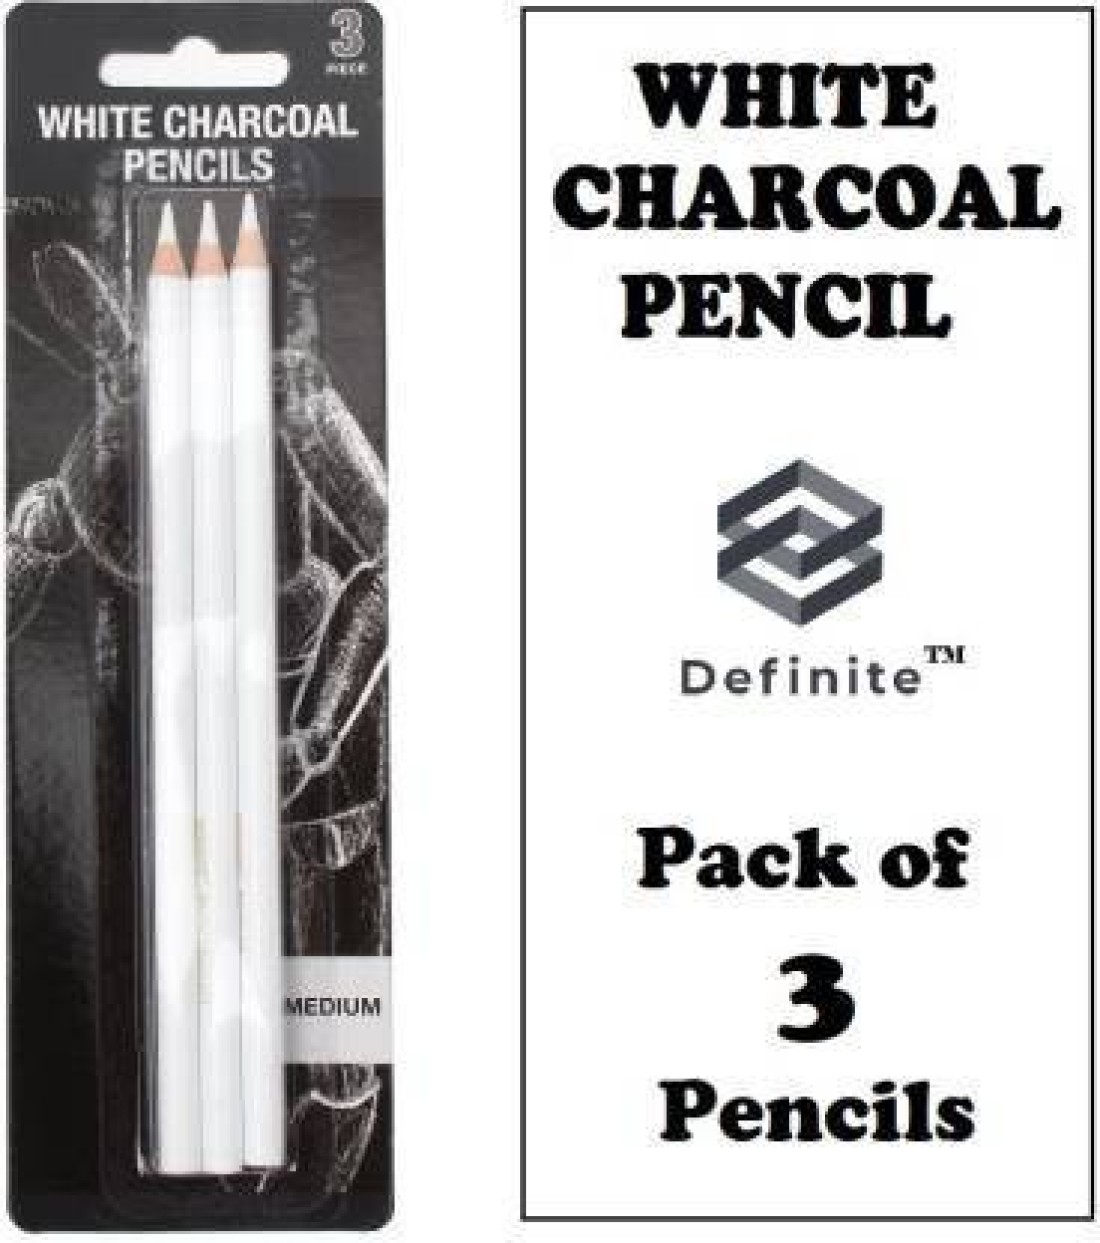 Rk 3 Pcs White Medium Charcoal Art Drawing Pencils Set,  Sketching Pencils for Dark or Tinted Paper round Shaped Color Pencils 